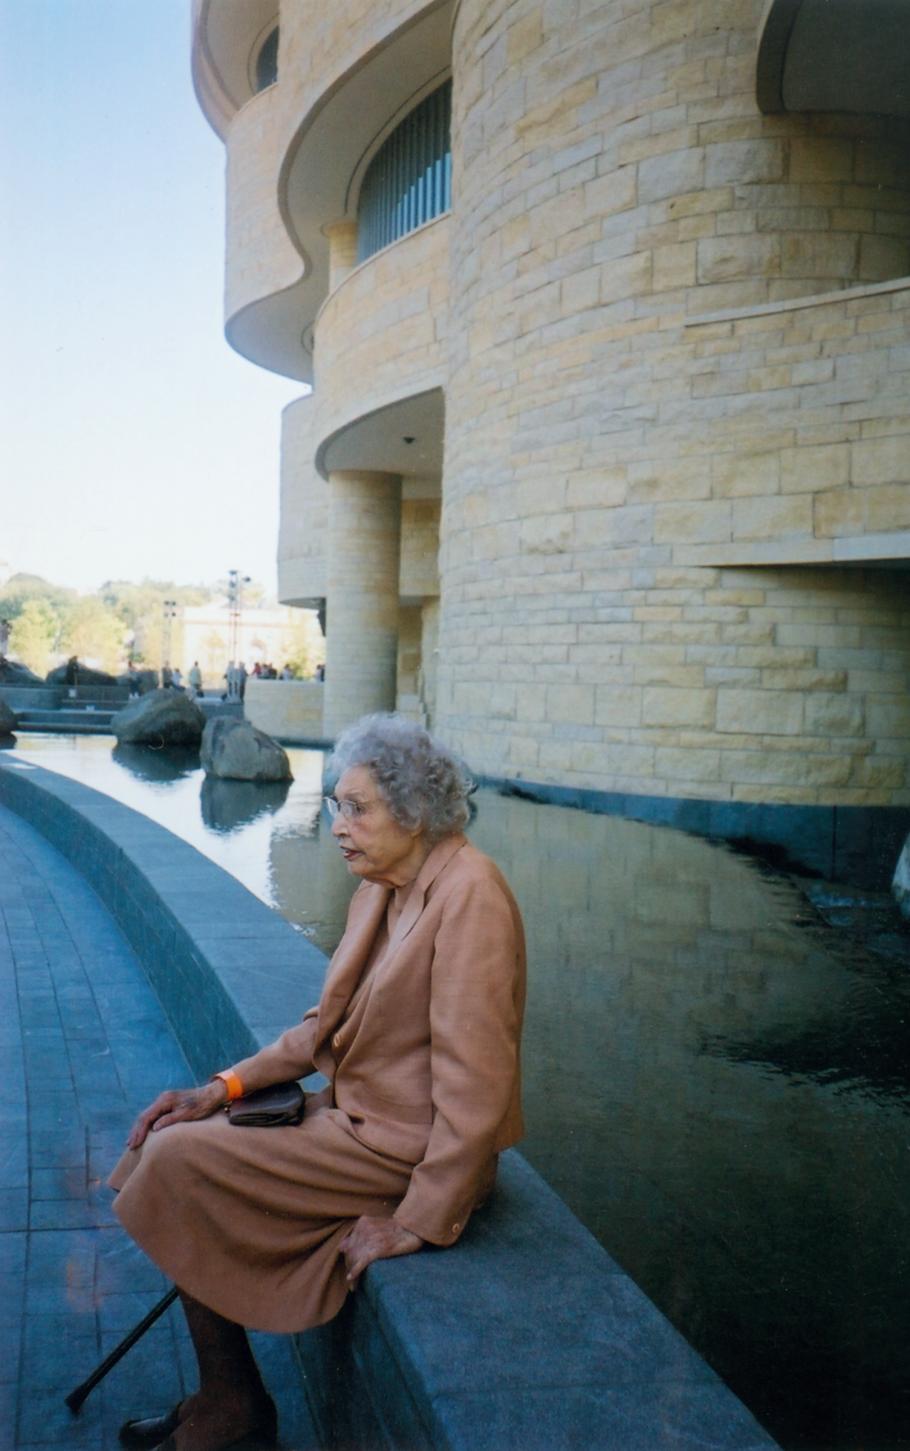 Mary Golda Ross seated outside of the National Museum of the American Indian in Washington, DC.